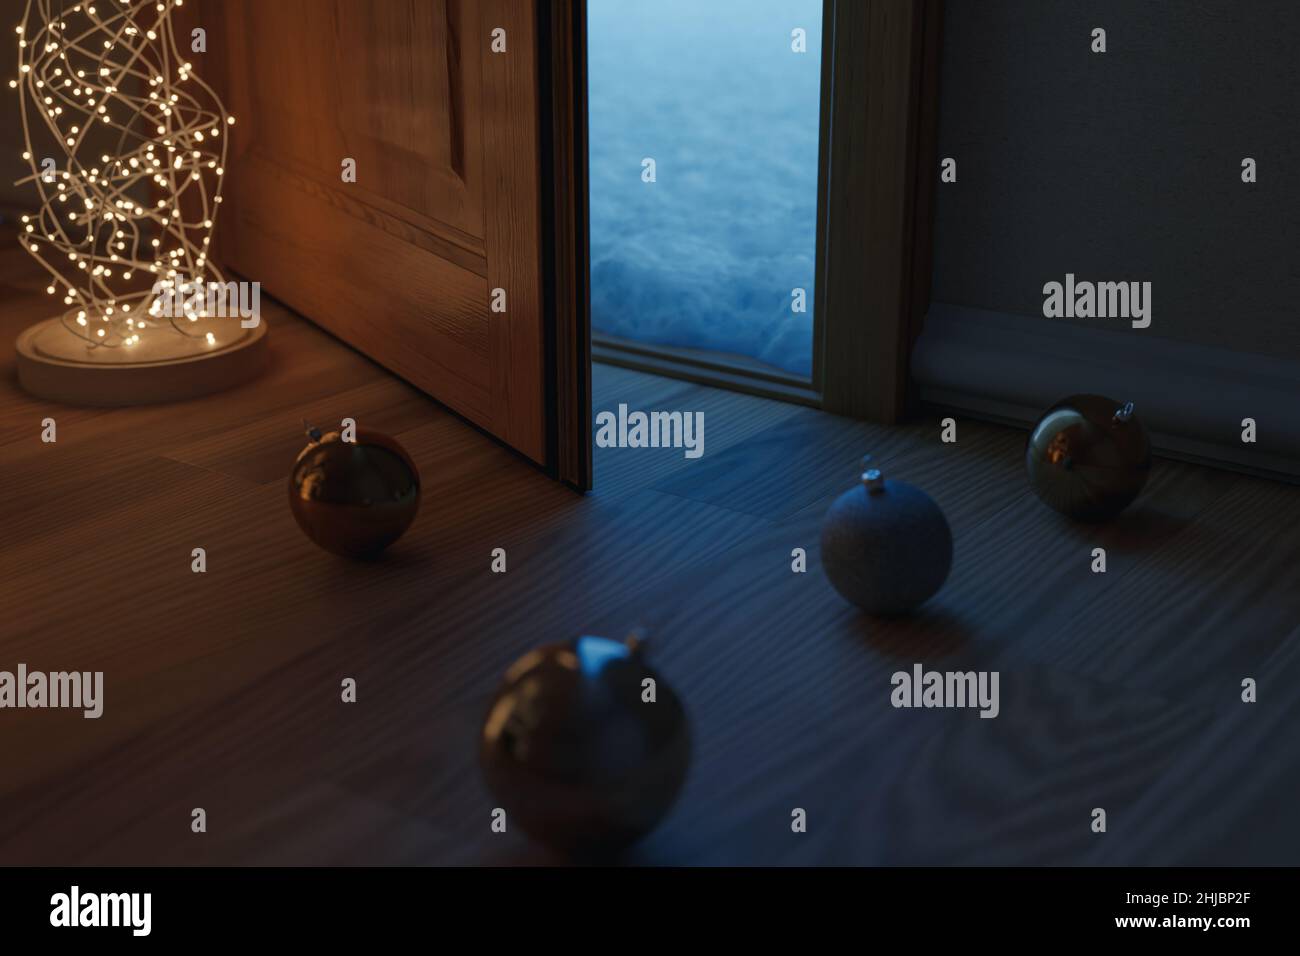 3d rendering of christmas balls laying on laminate floor next to open front door covered with a thick snow cover. Concept white christmas Stock Photo